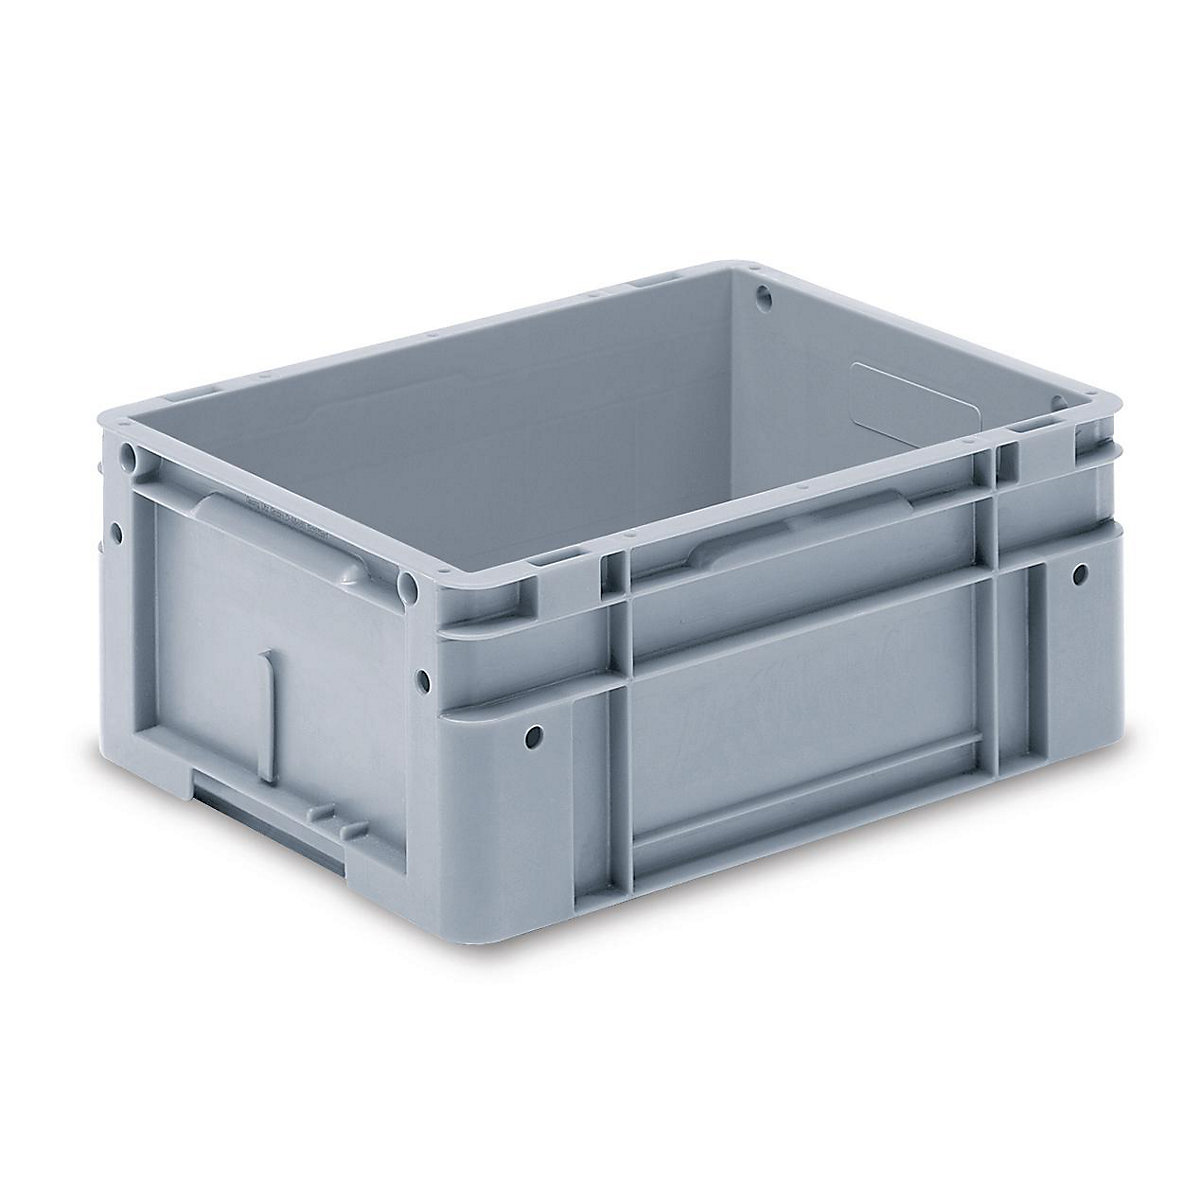 Euro size stacking containers, external LxWxH 400 x 300 x 220 mm, grey, pack of 4